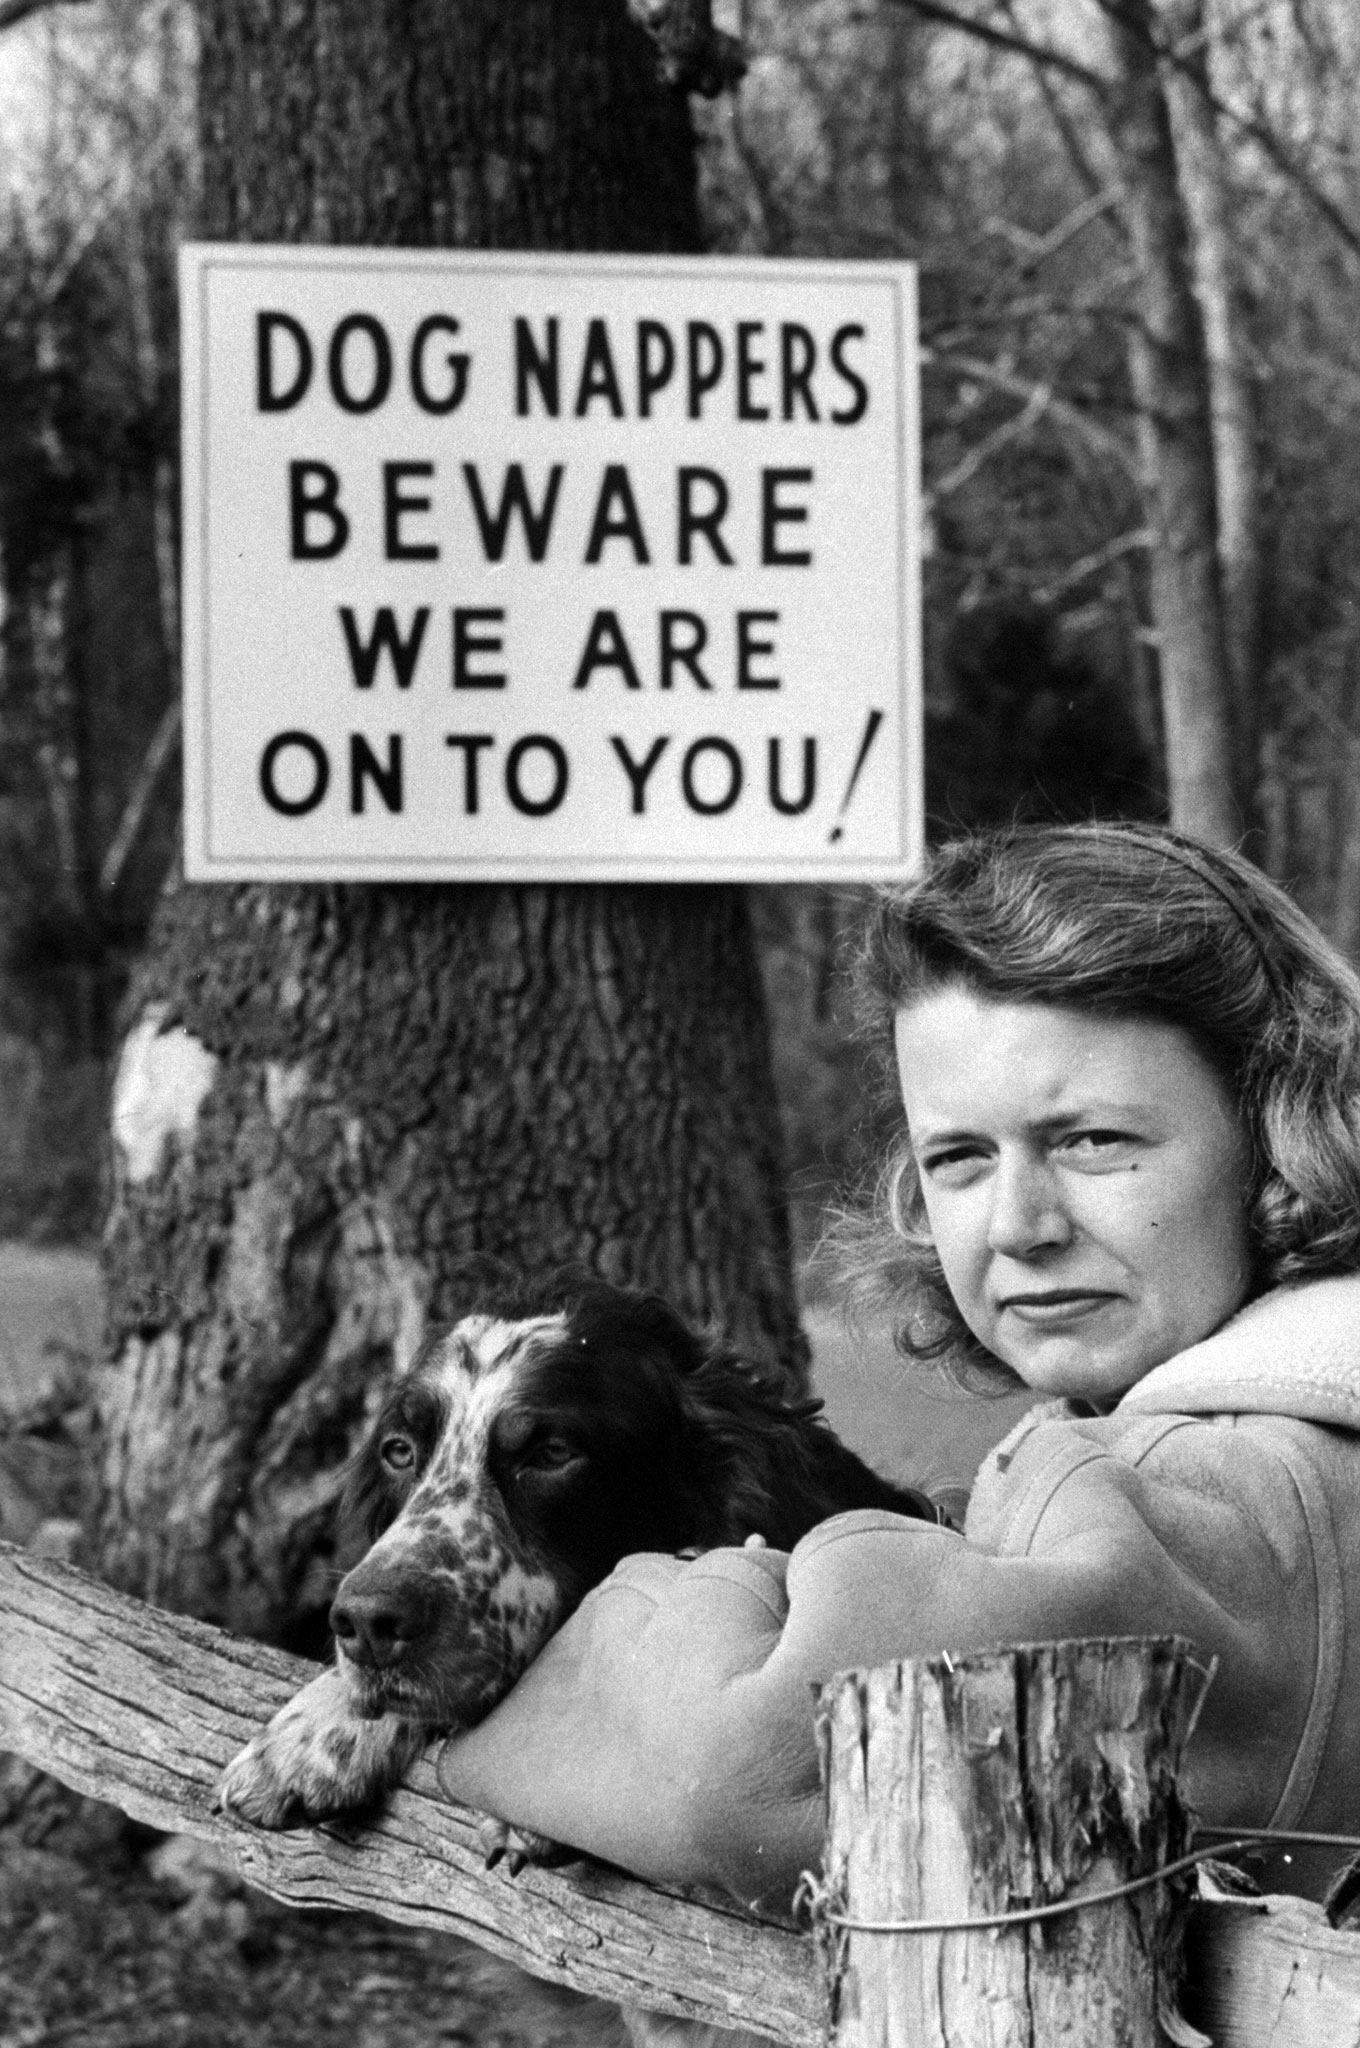 Angered by the disappearances of their family pets in Clarke County, Va., Mrs. William Mitchell and her neighbors put up signs to discourage thieves.